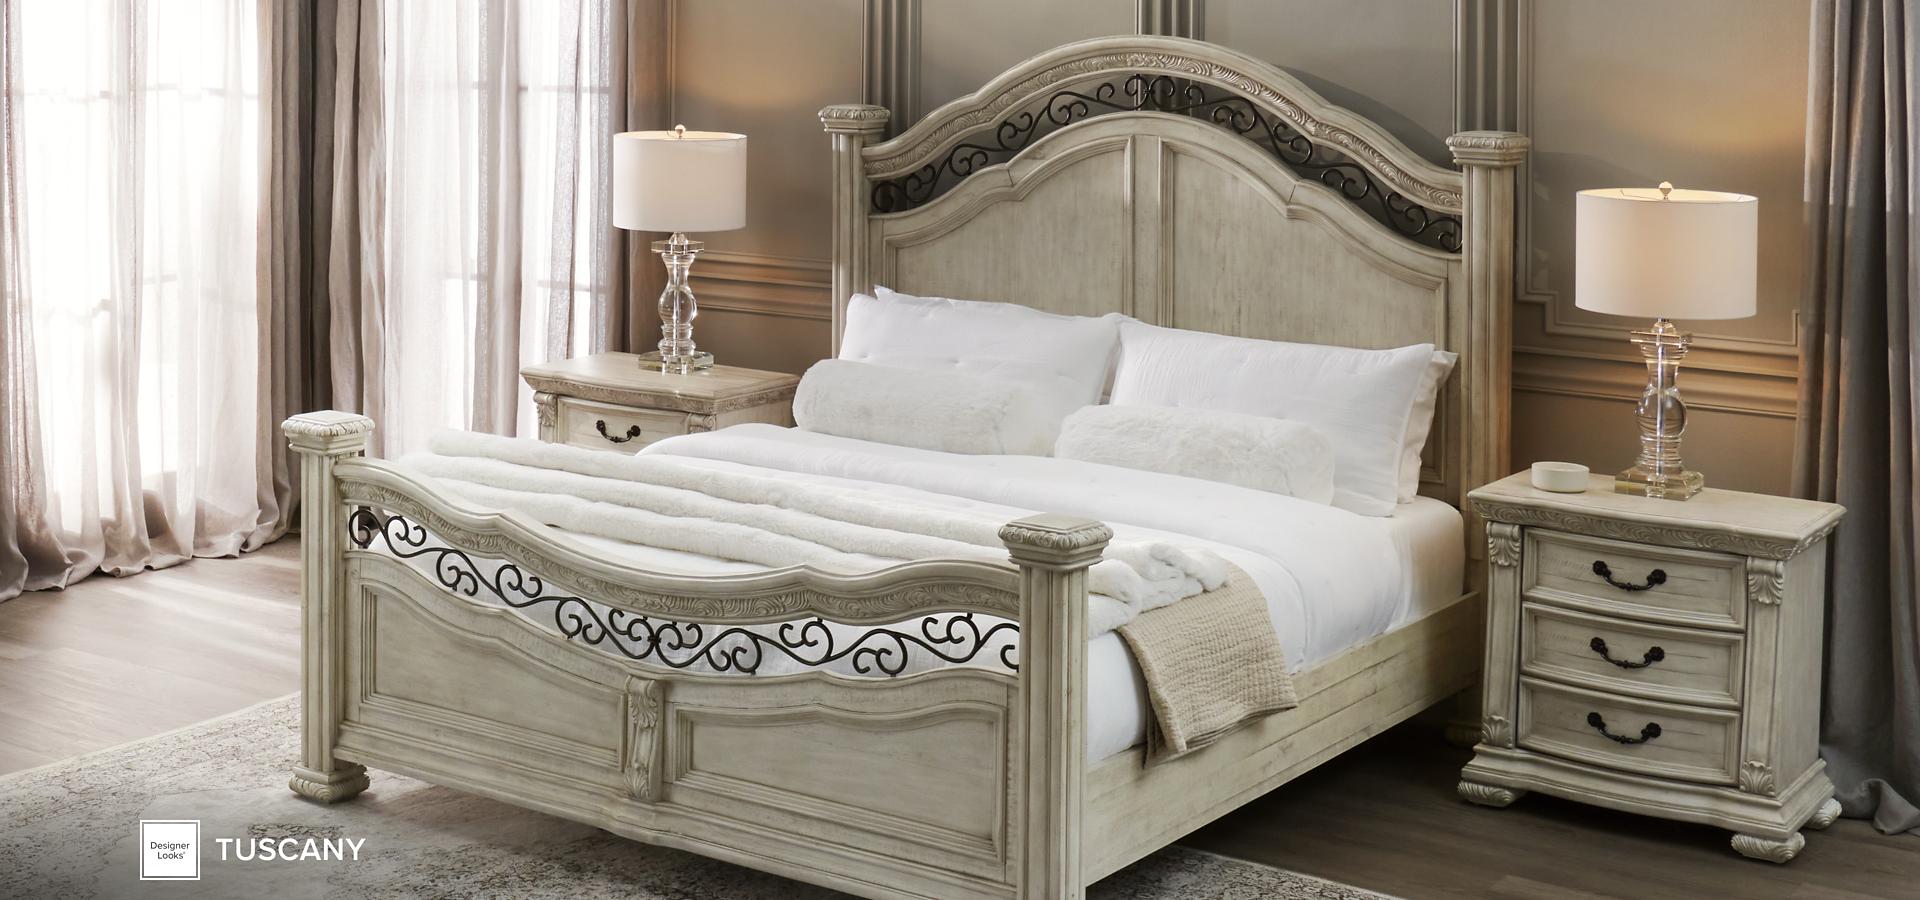 The Hazel Bedroom Collection